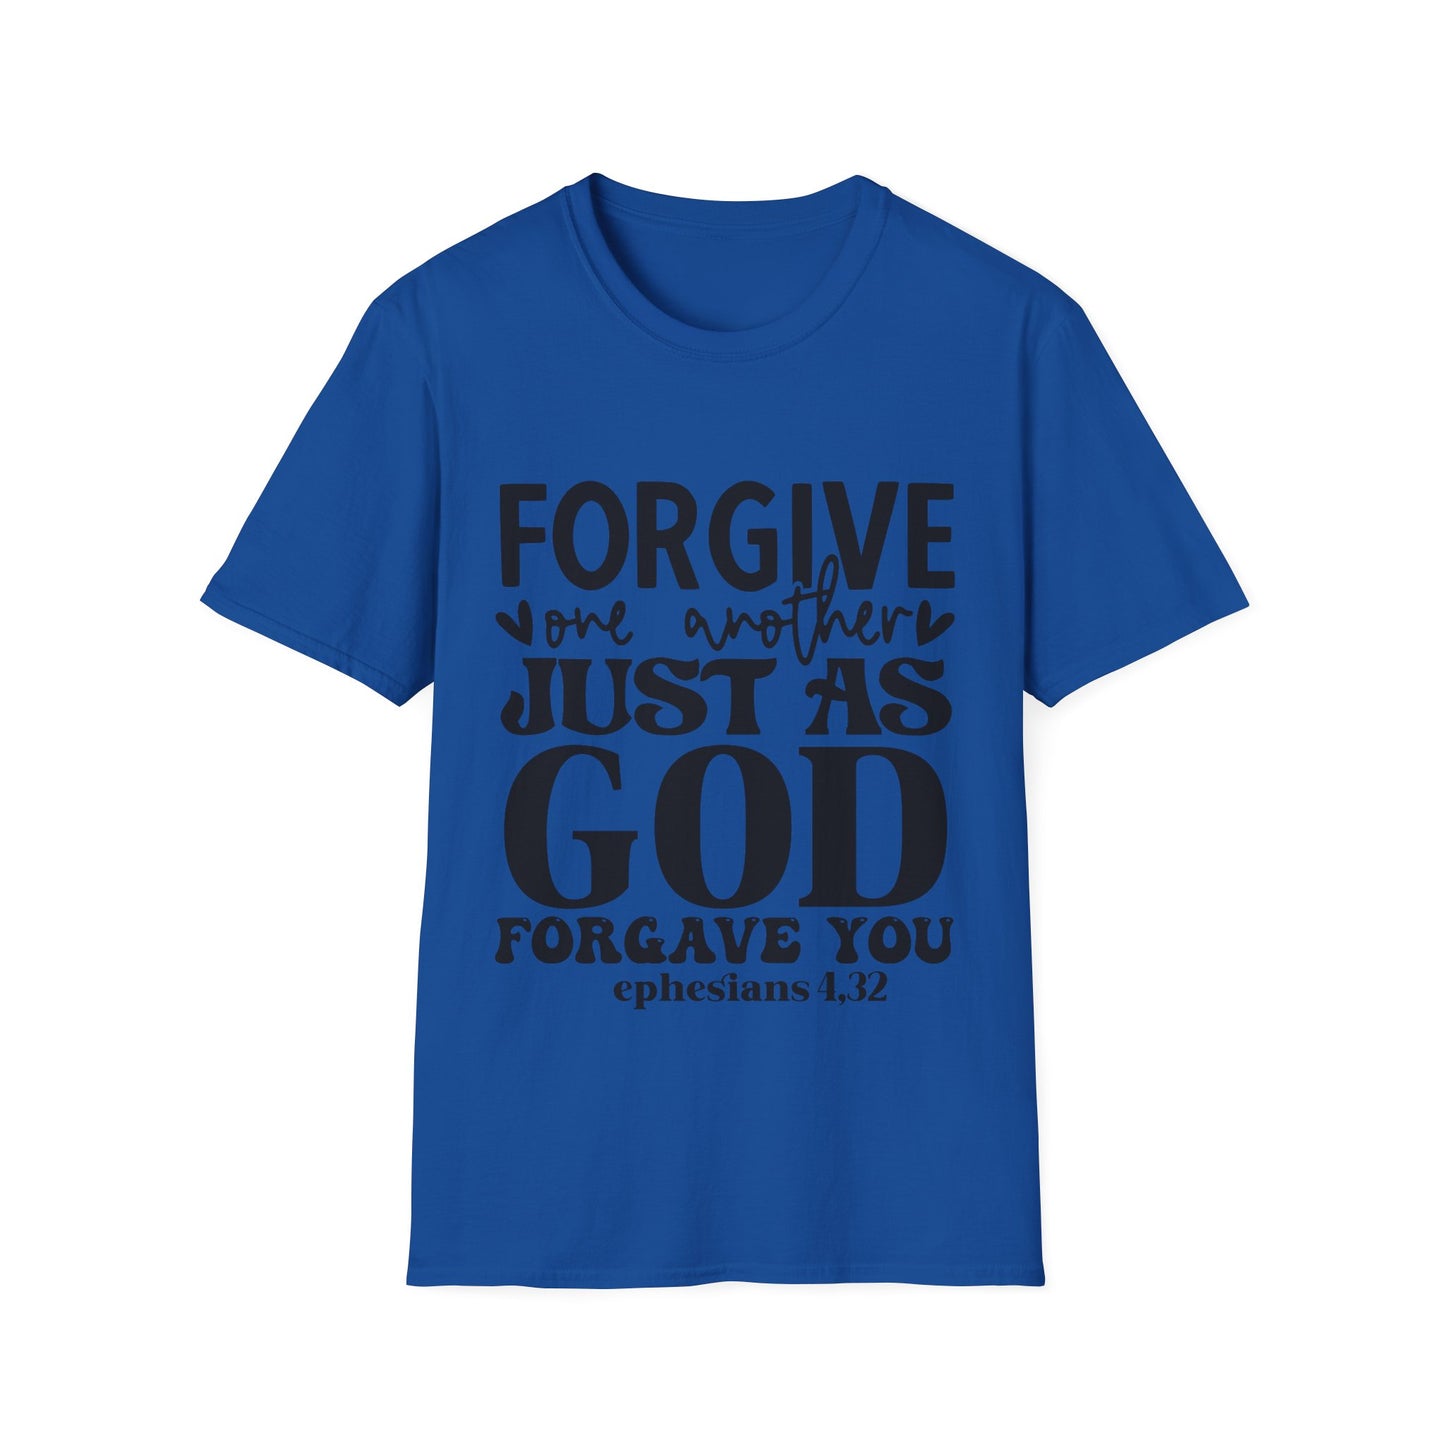 Forgive One Another Just As God Forgave You Ephesians Triple Viking T-Shirt